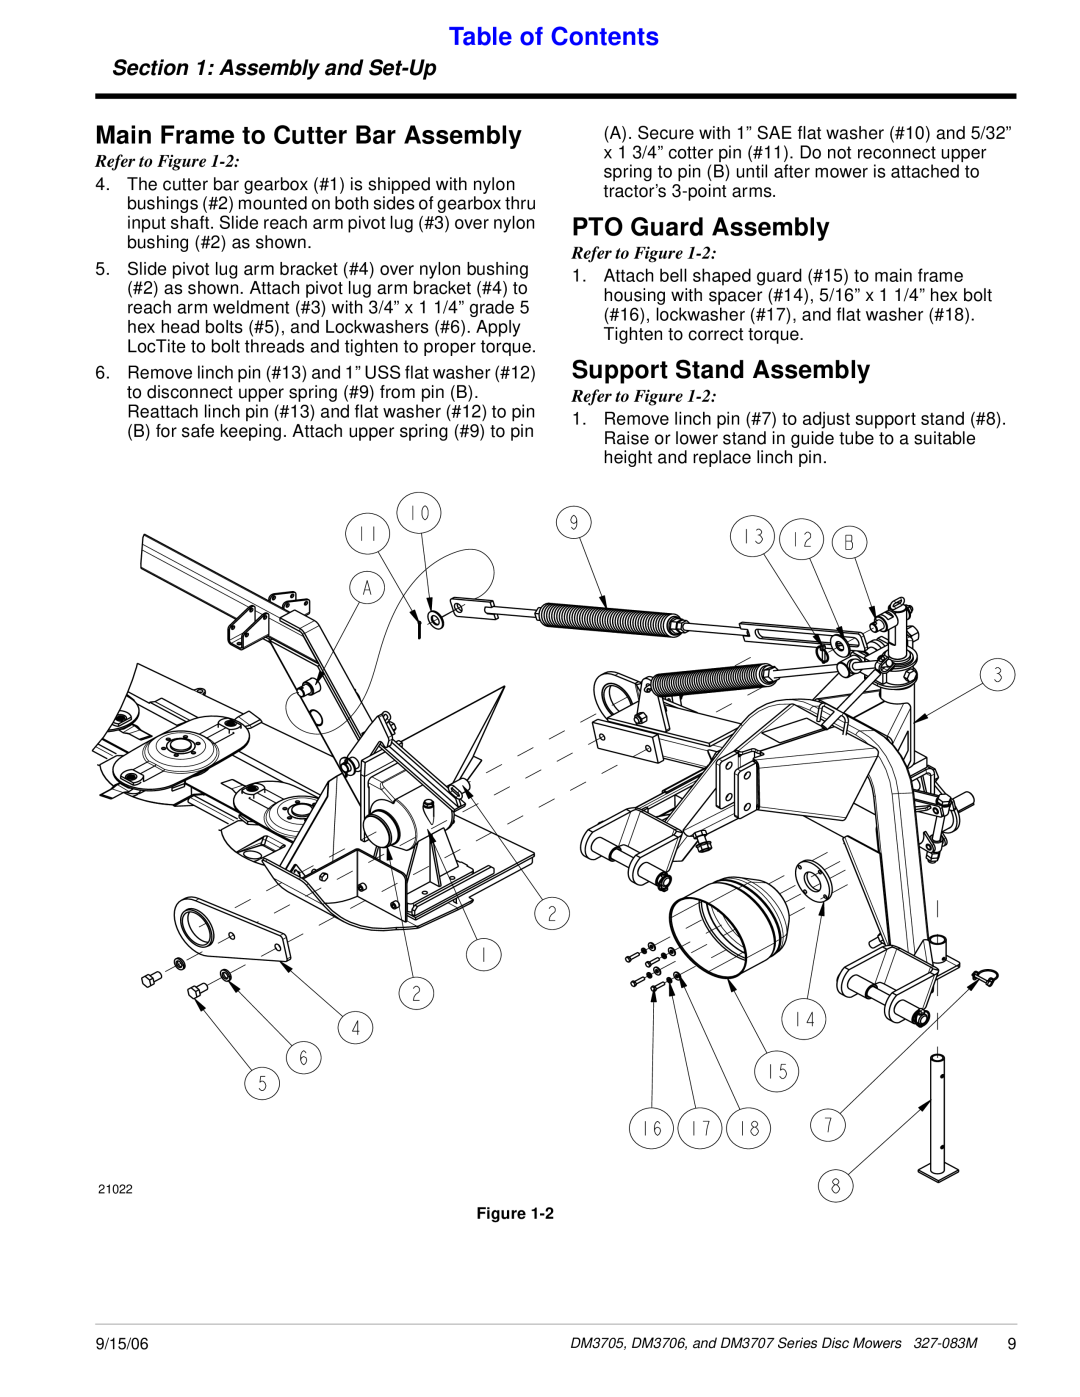 Land Pride DM3707 Series Main Frame to Cutter Bar Assembly, PTO Guard Assembly, Support Stand Assembly, Table of Contents 